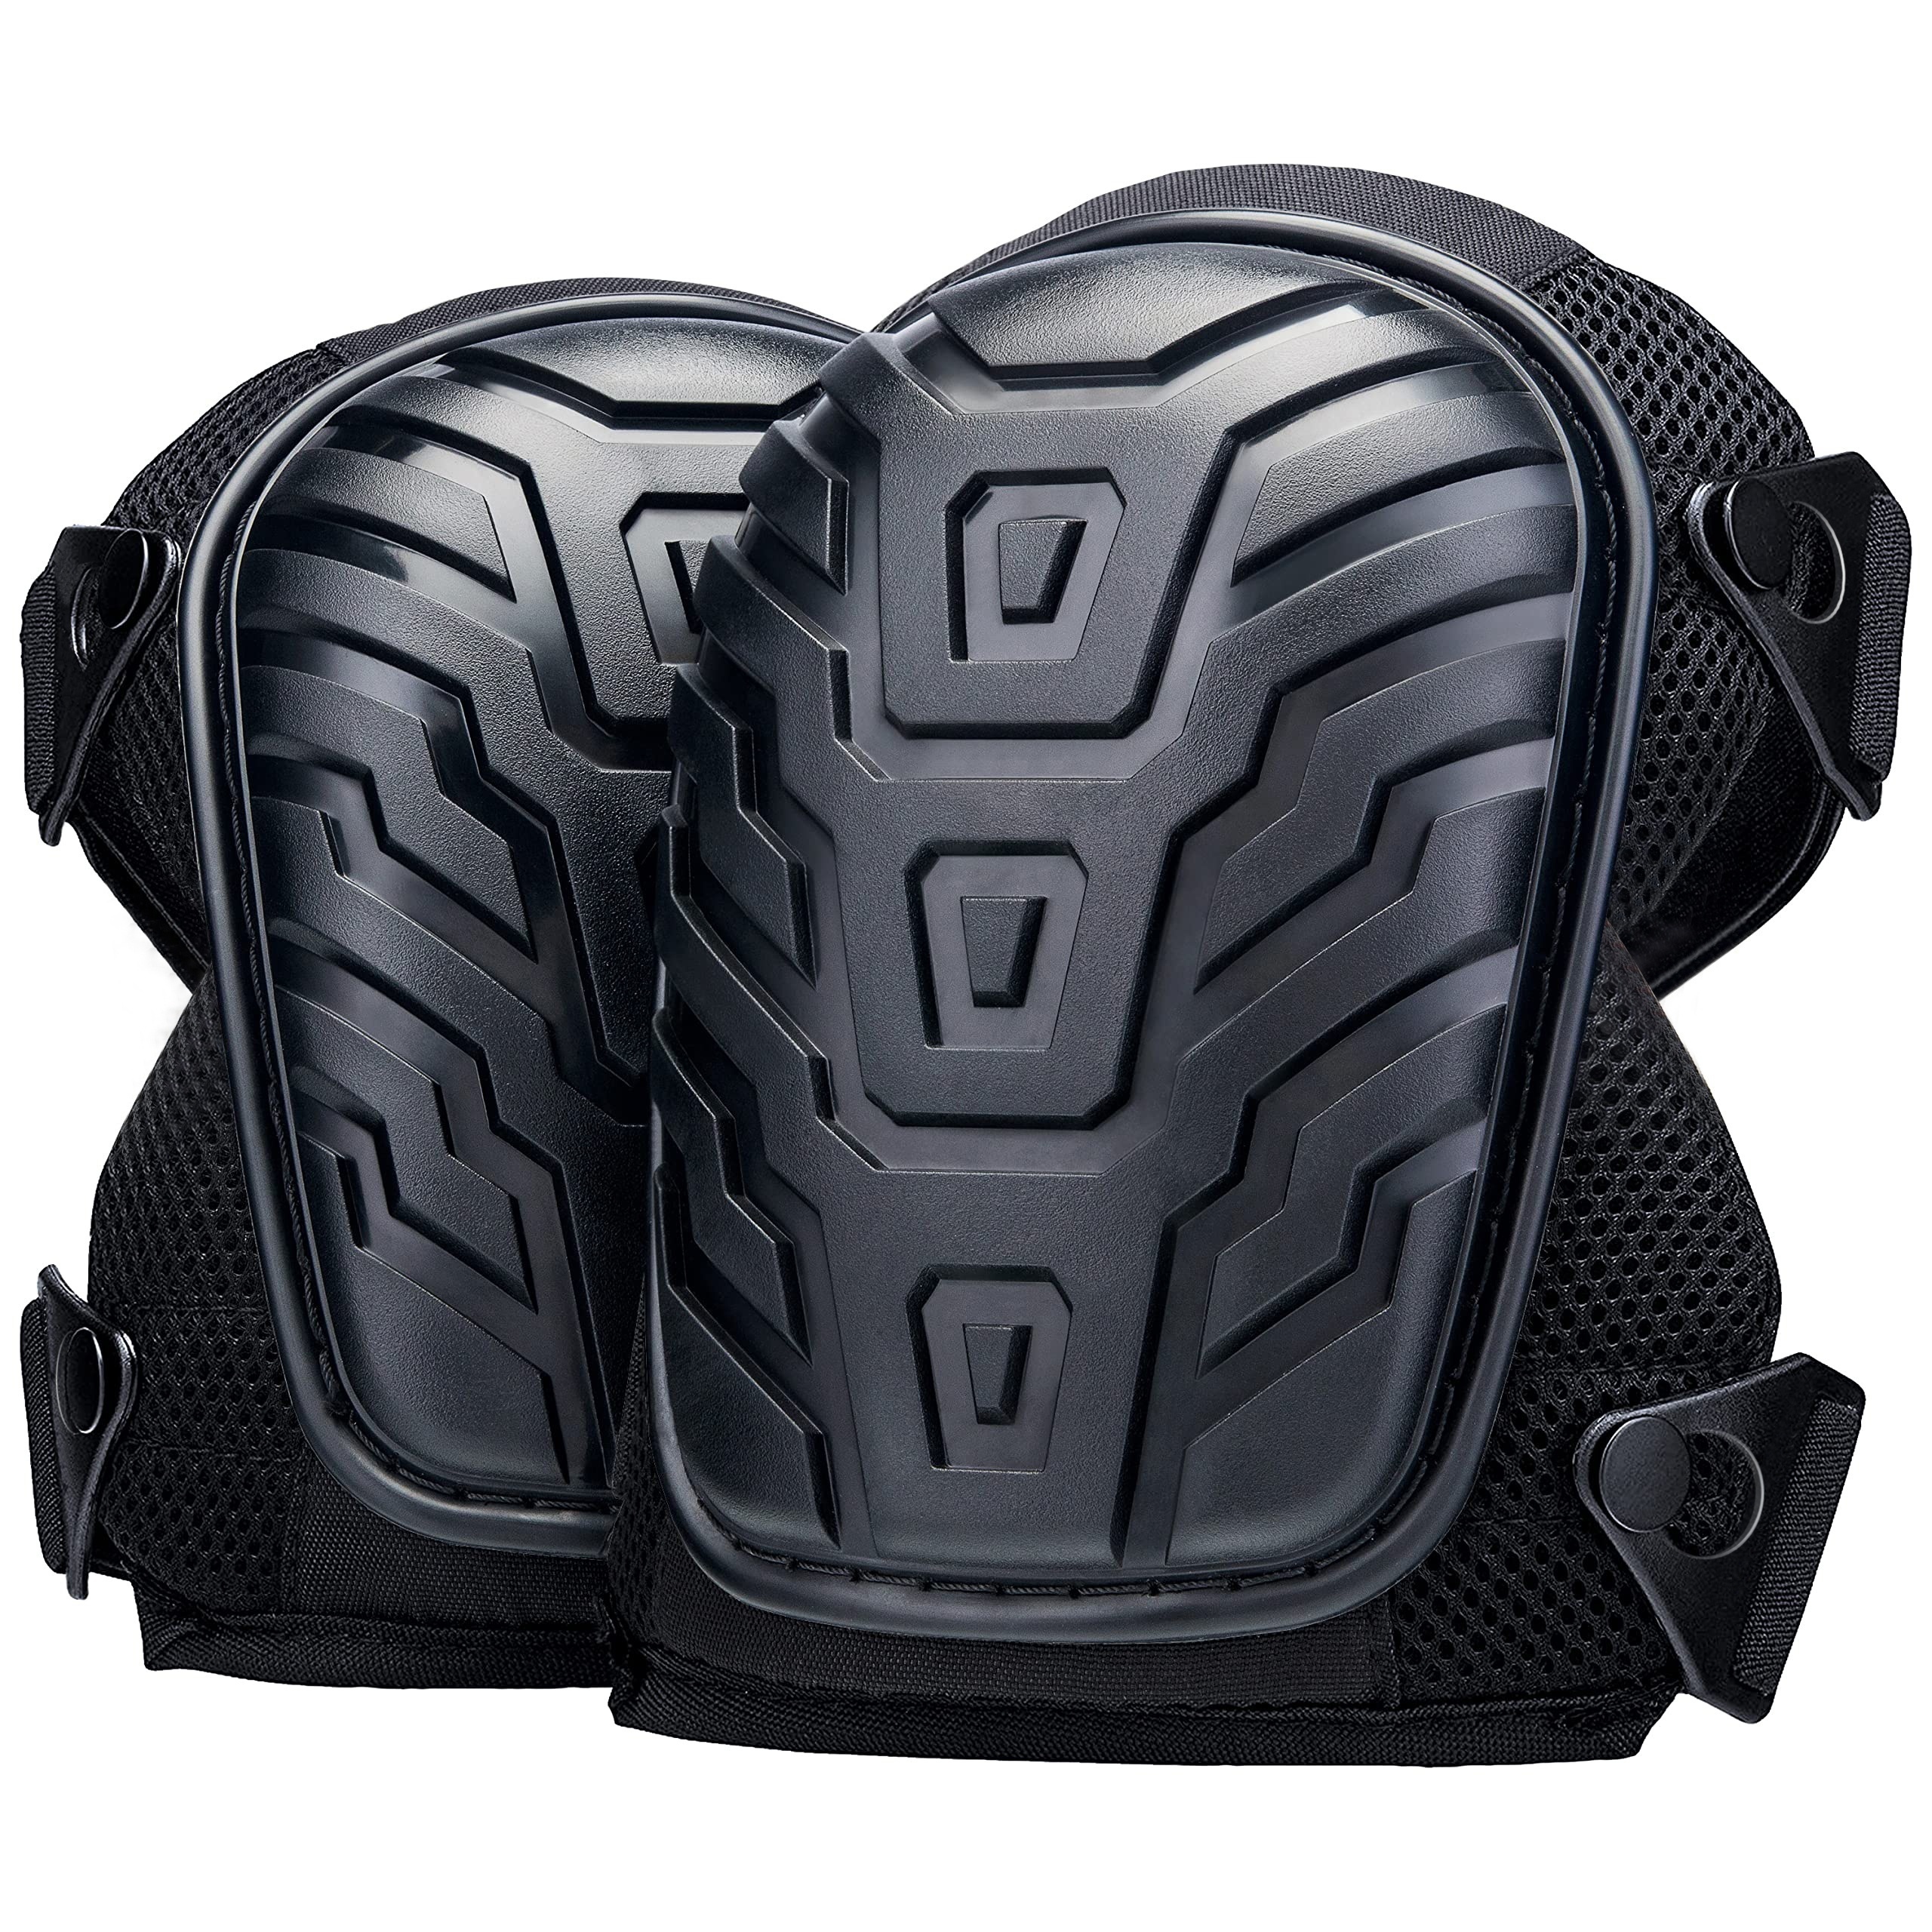 

1 Pair Of Professional Knee Pads - Thick Gel Cushion, Double Straps & Adjustable Clips - Perfect For Work, Gardening & Construction - Men & Women Heavy Duty Tactical Knee Pads